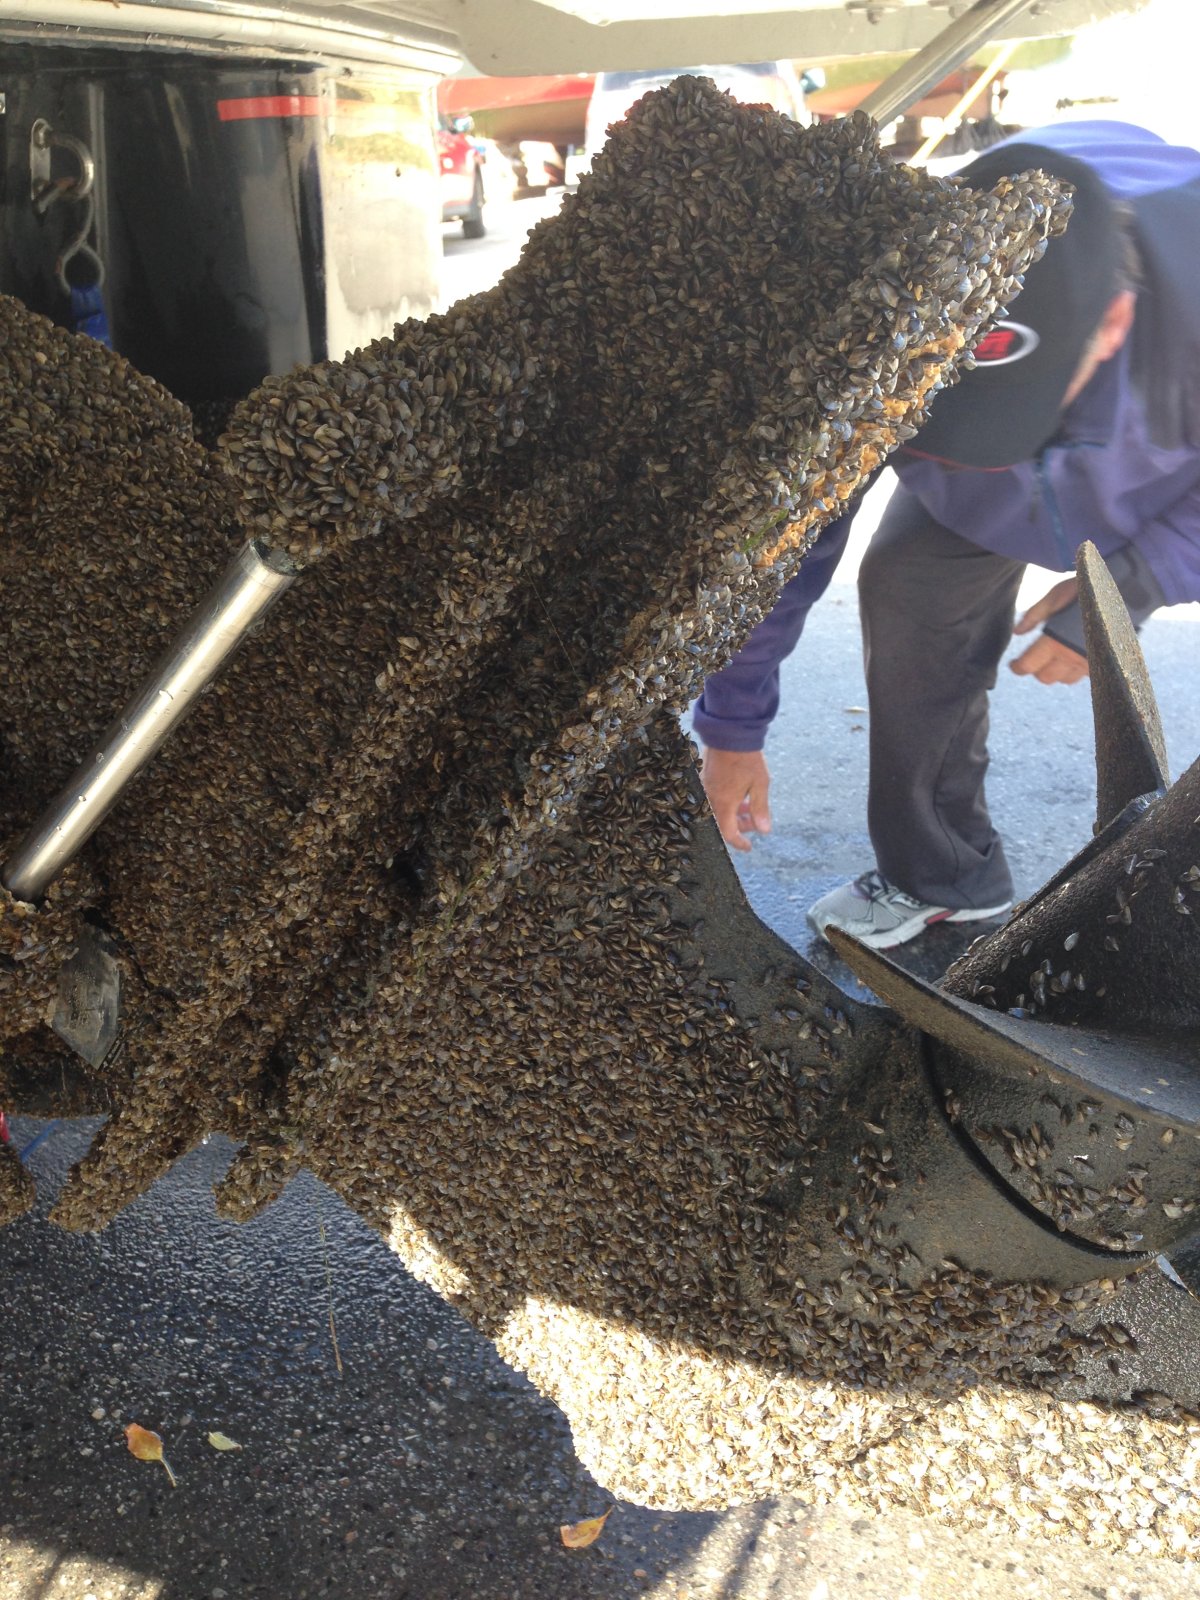 After 4 months in the water in Gimli, a boat is completely covered in zebra mussels.